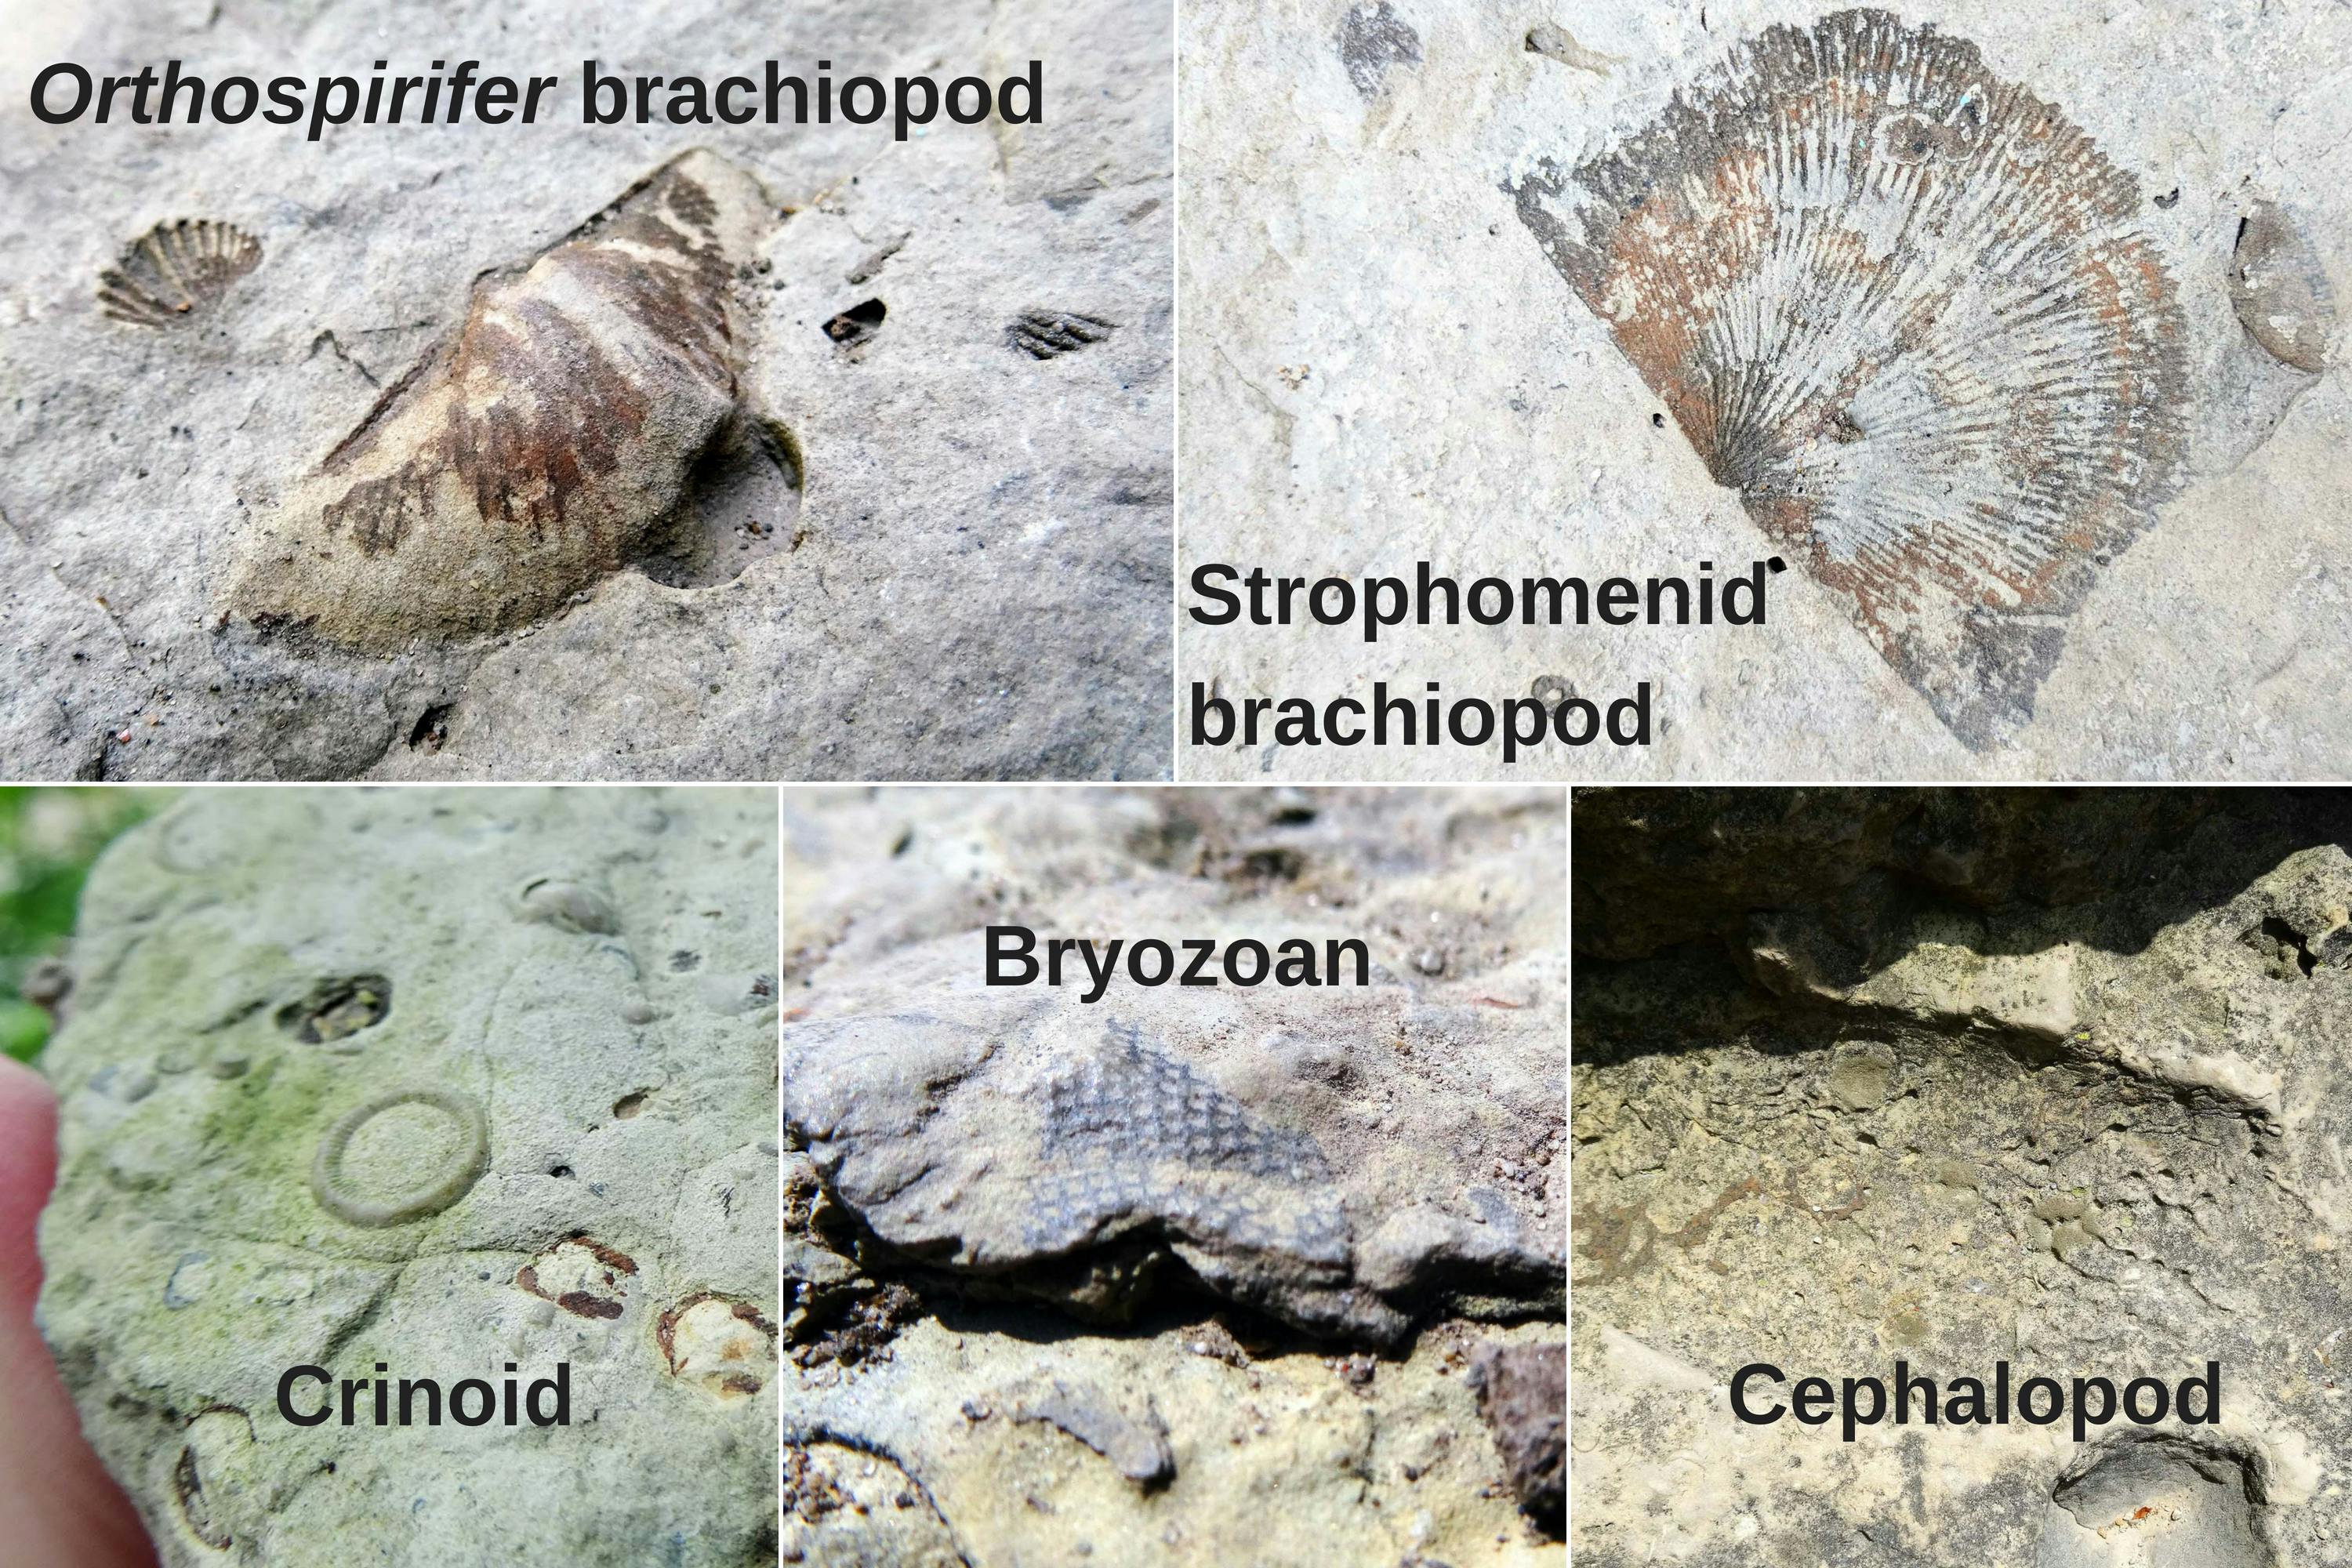 Five images of fossils are combined into a grid. Each fossil has text identifying it. A rounded seashell protruding from rock is labeled as an Orthospirifer brachiopod; a flat, leaf-like seashell is labeled as Strophomenid brachiopod; a circular ring in rock is a crinoid; a lacy fossil on a rock surface is a bryozoan; and a wavy depression in rock is a cephalopod.